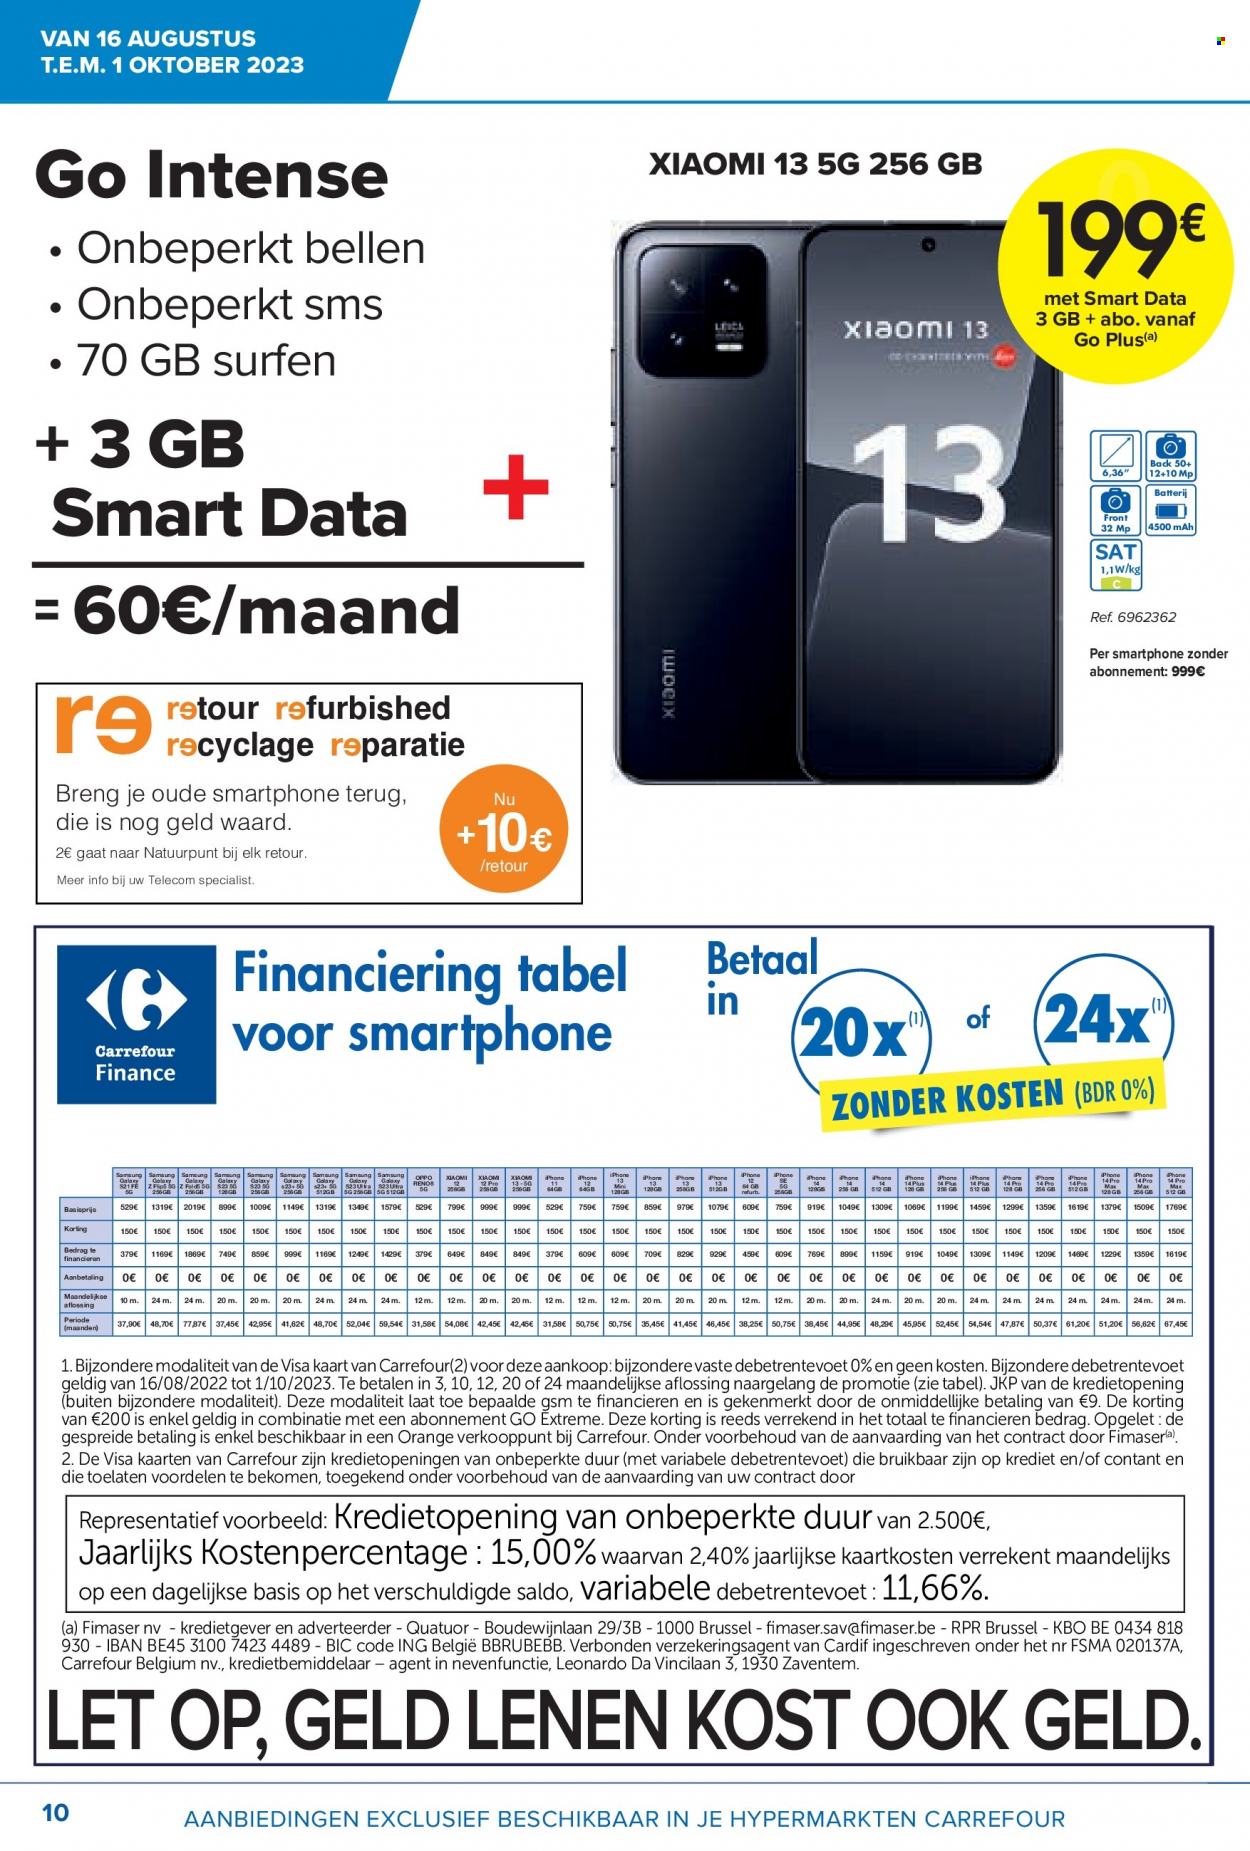 Catalogue Carrefour hypermarkt - 16.8.2023 - 1.10.2023. Page 10.